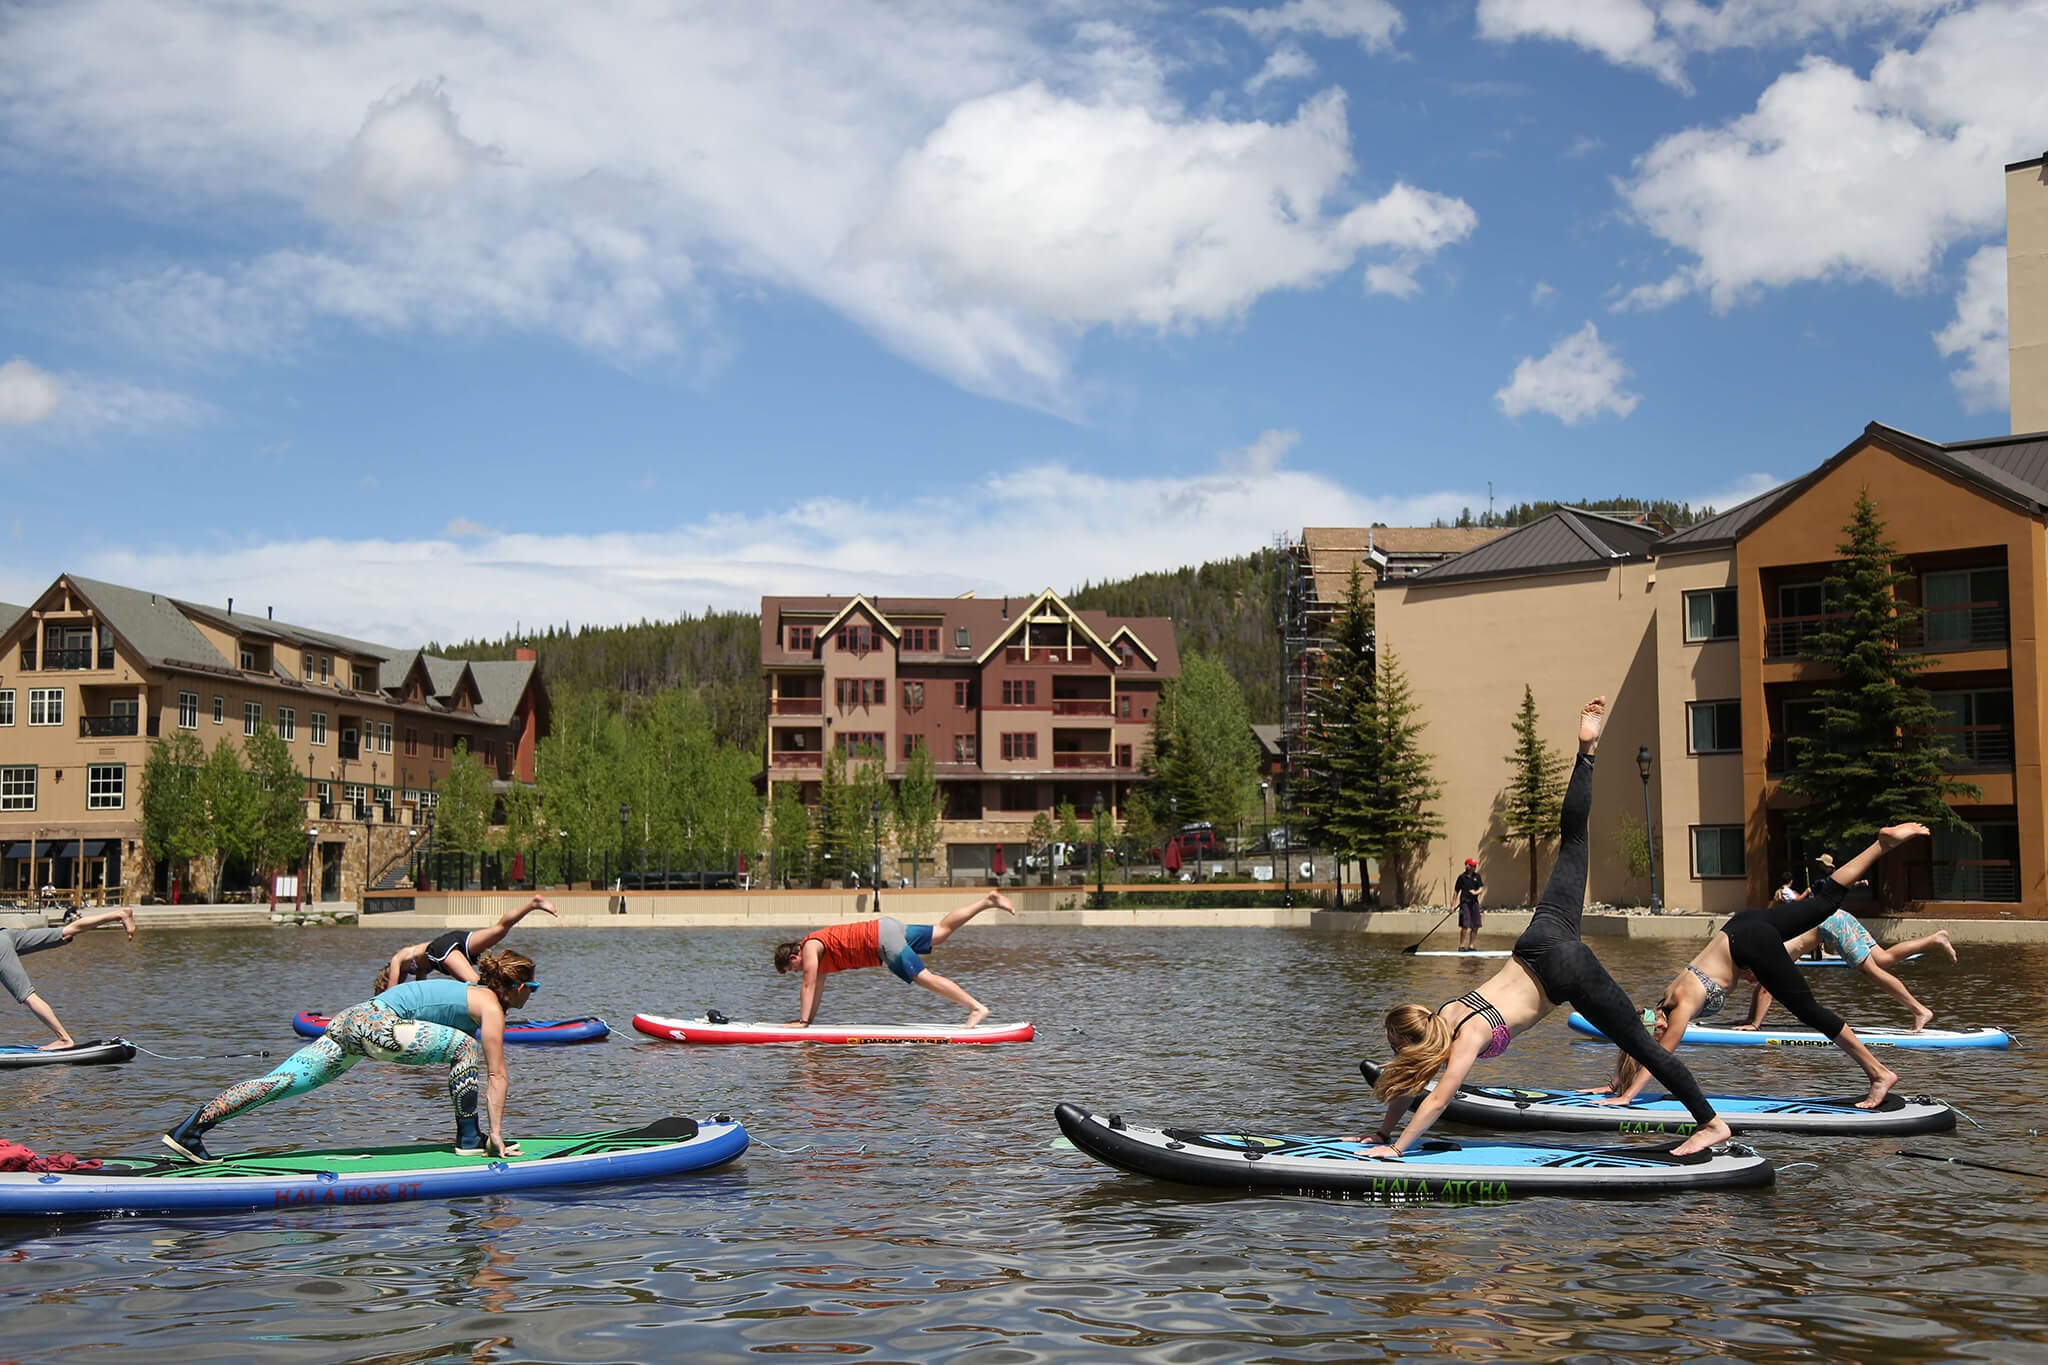 Paddleboard yoga group on Maggie Pond in Breckenridge.